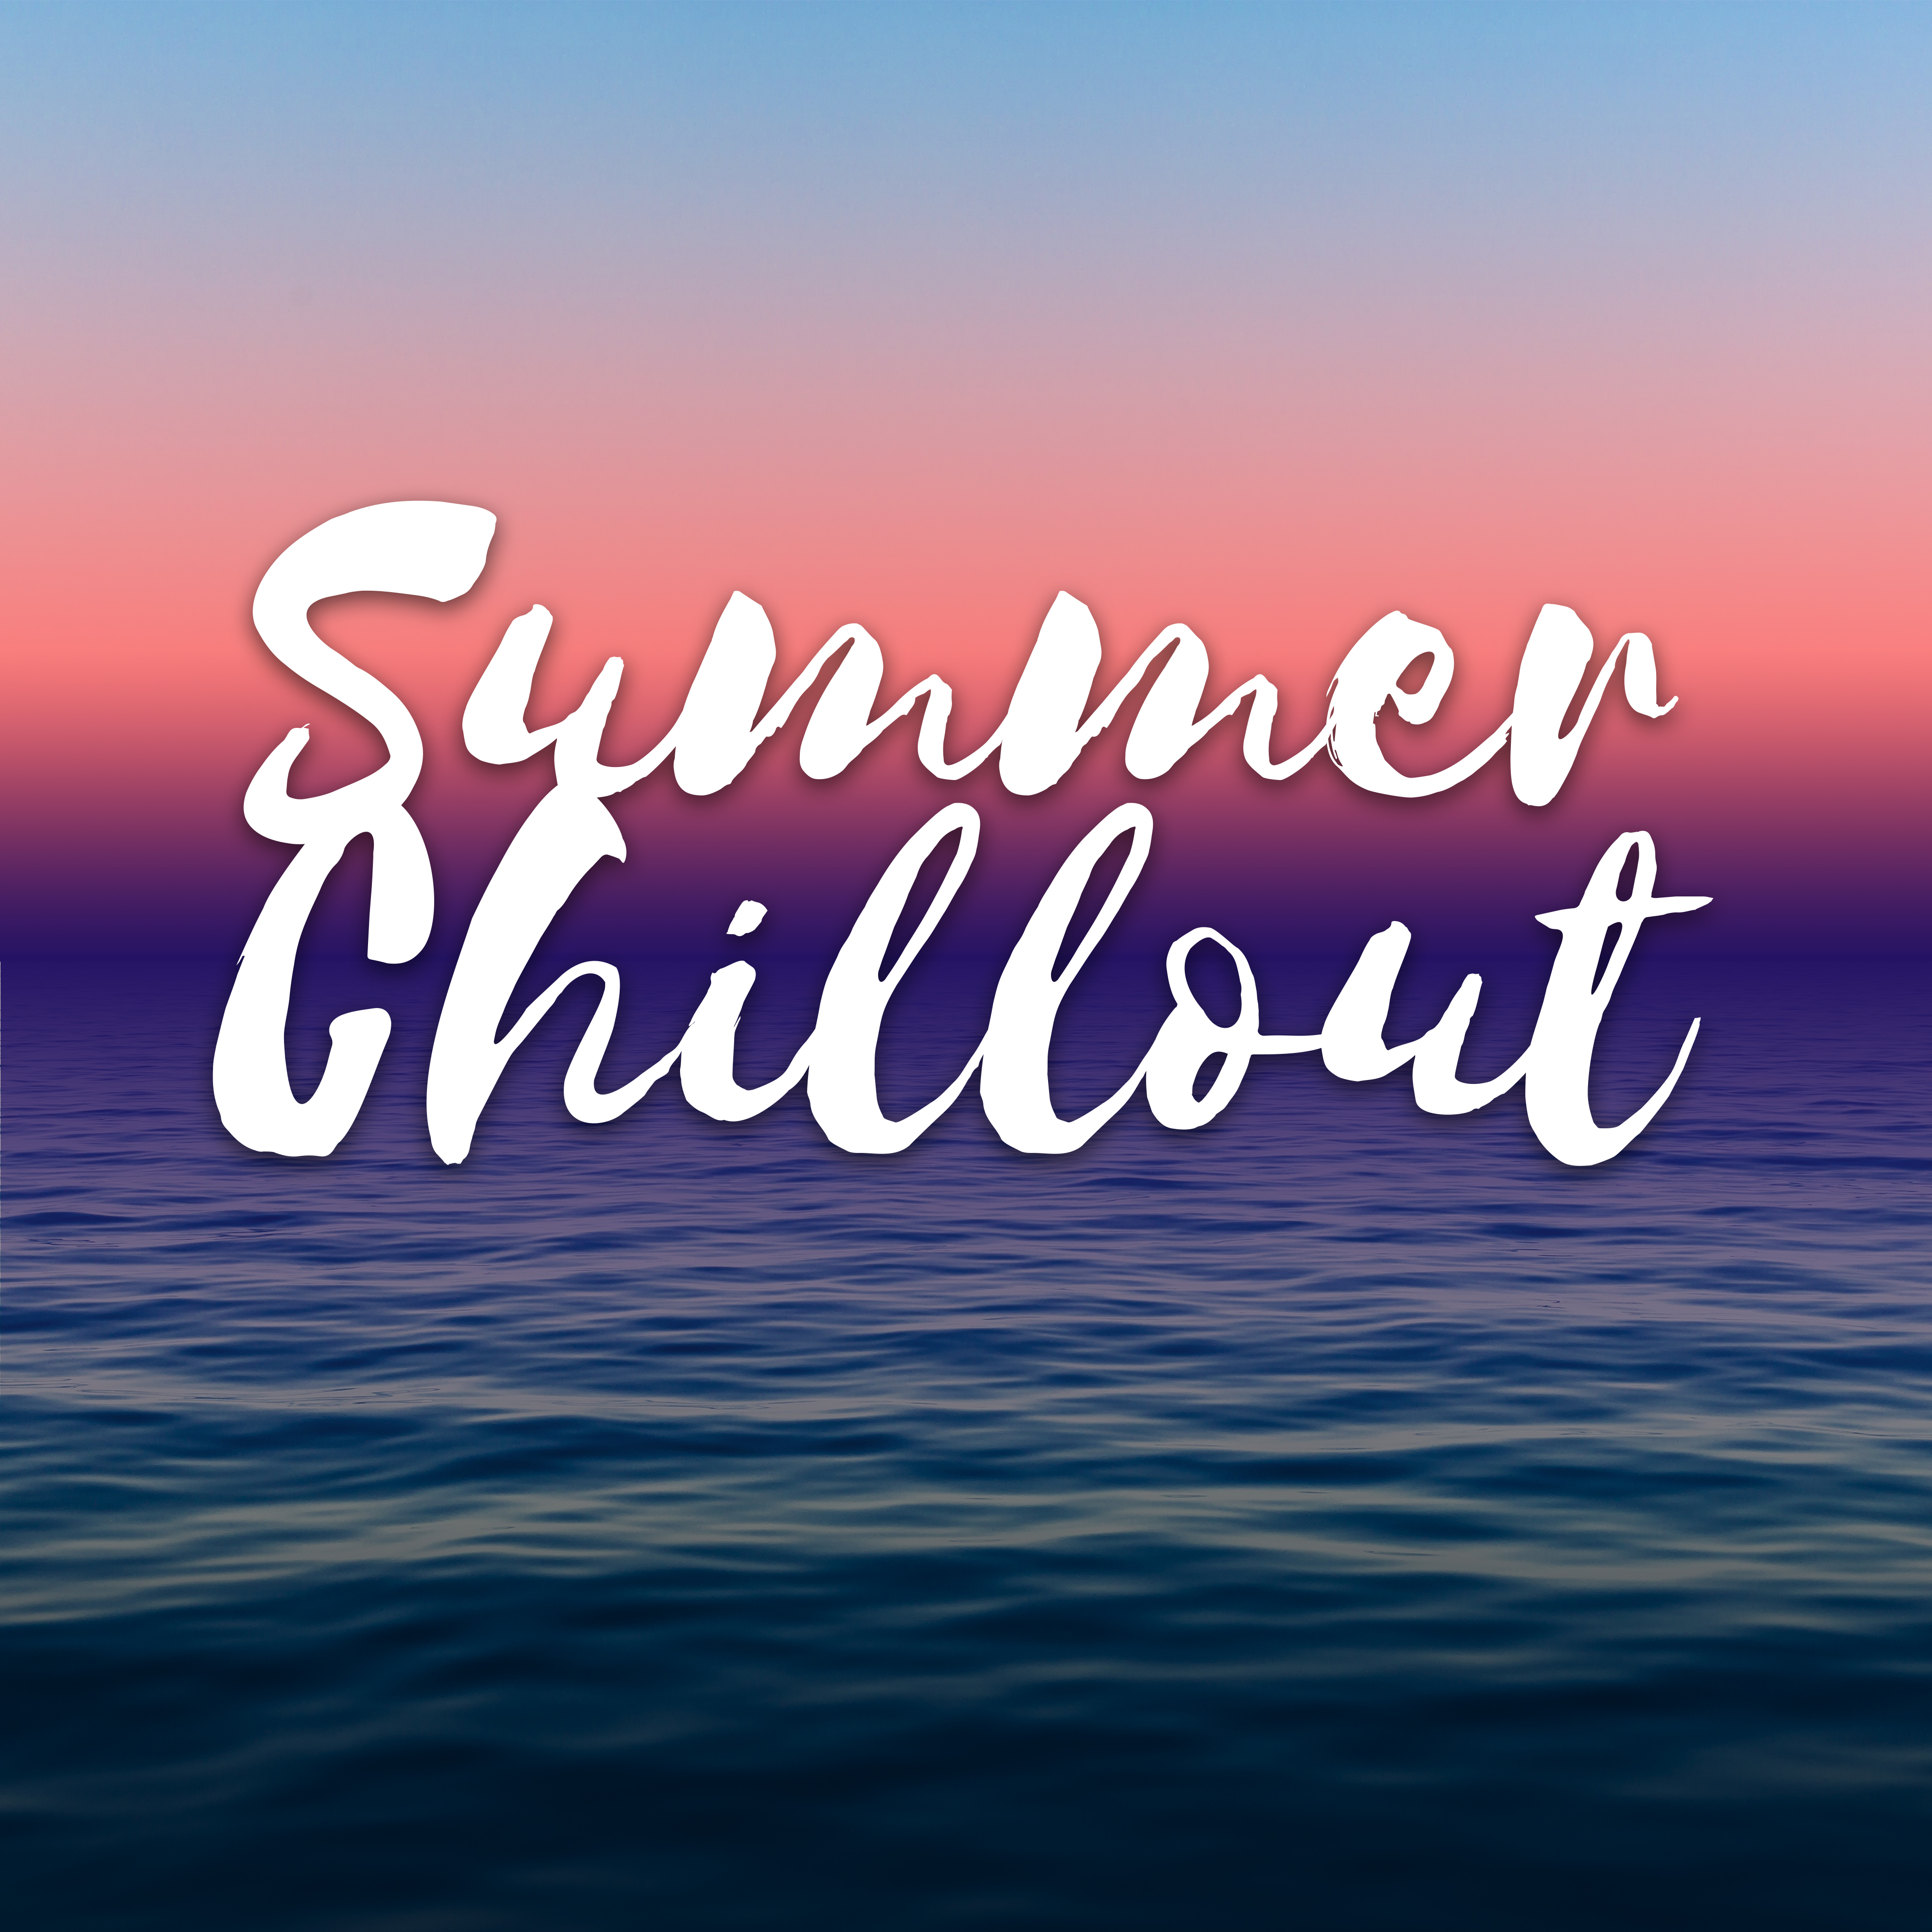 Summer Chillout  Chill Out 2017, Summer Lounge, Relax, Dance Floor, Dance Music